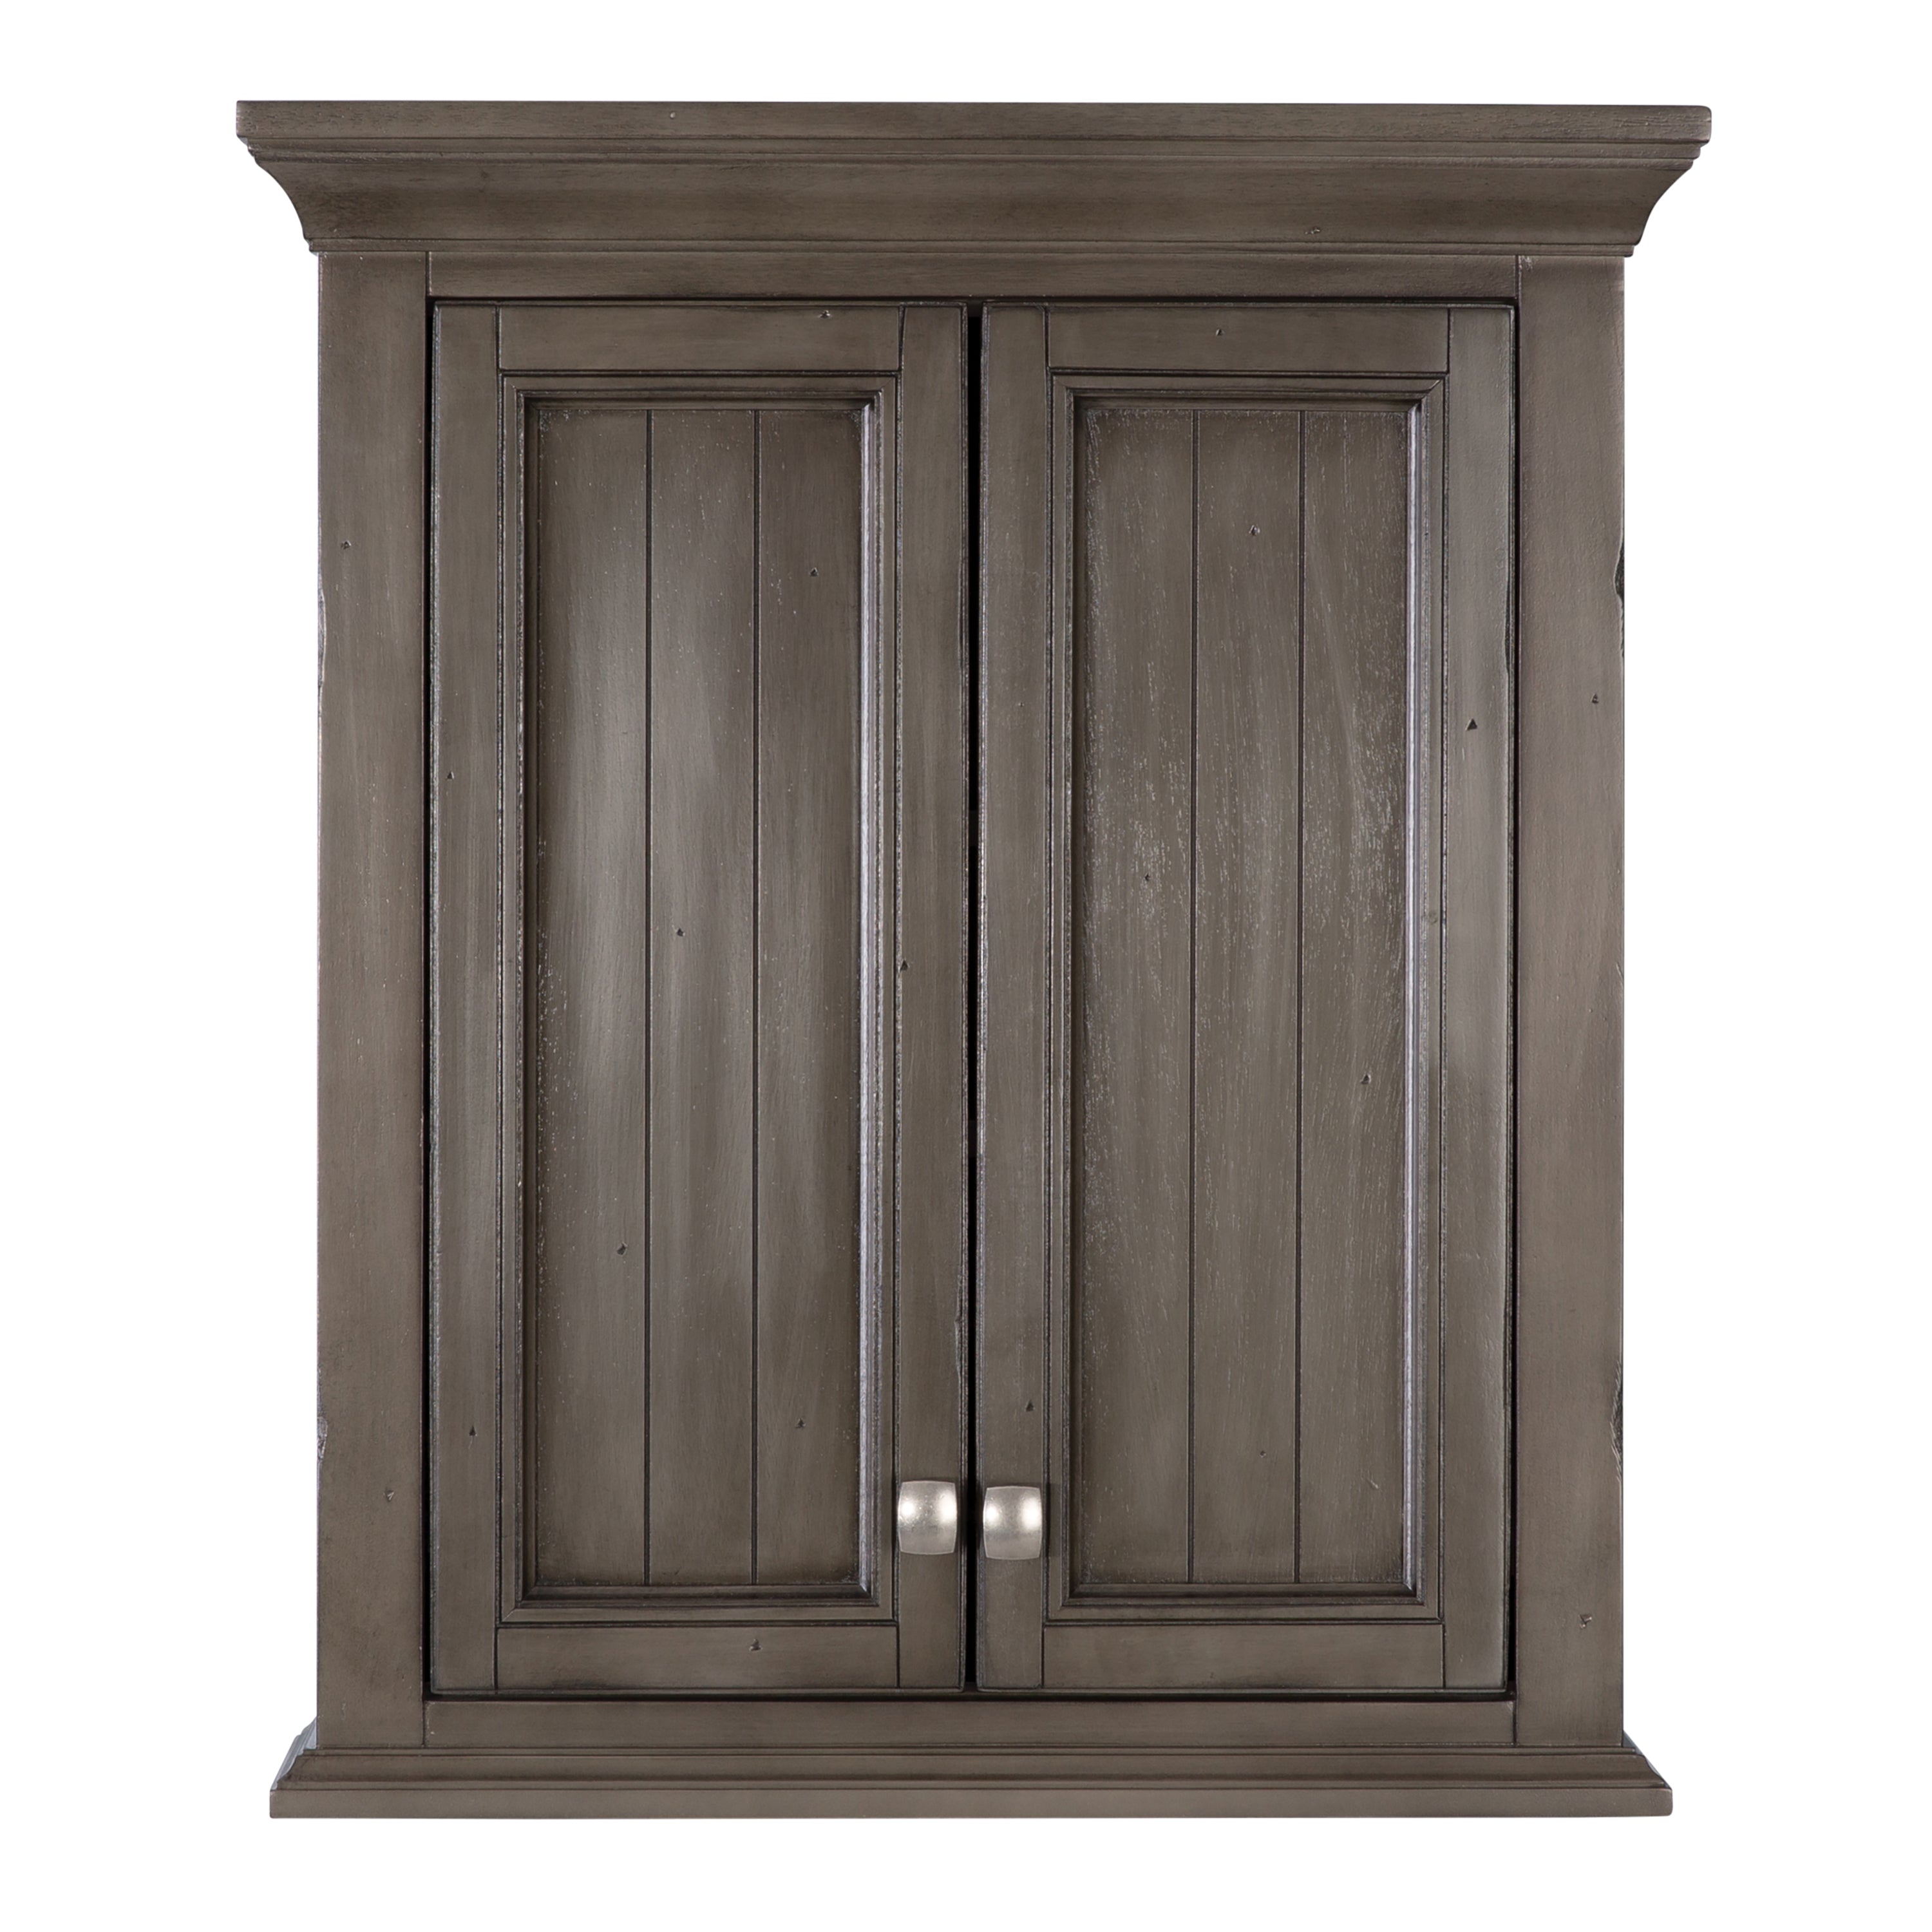 24" x 28" Cottage Wall Cabinet